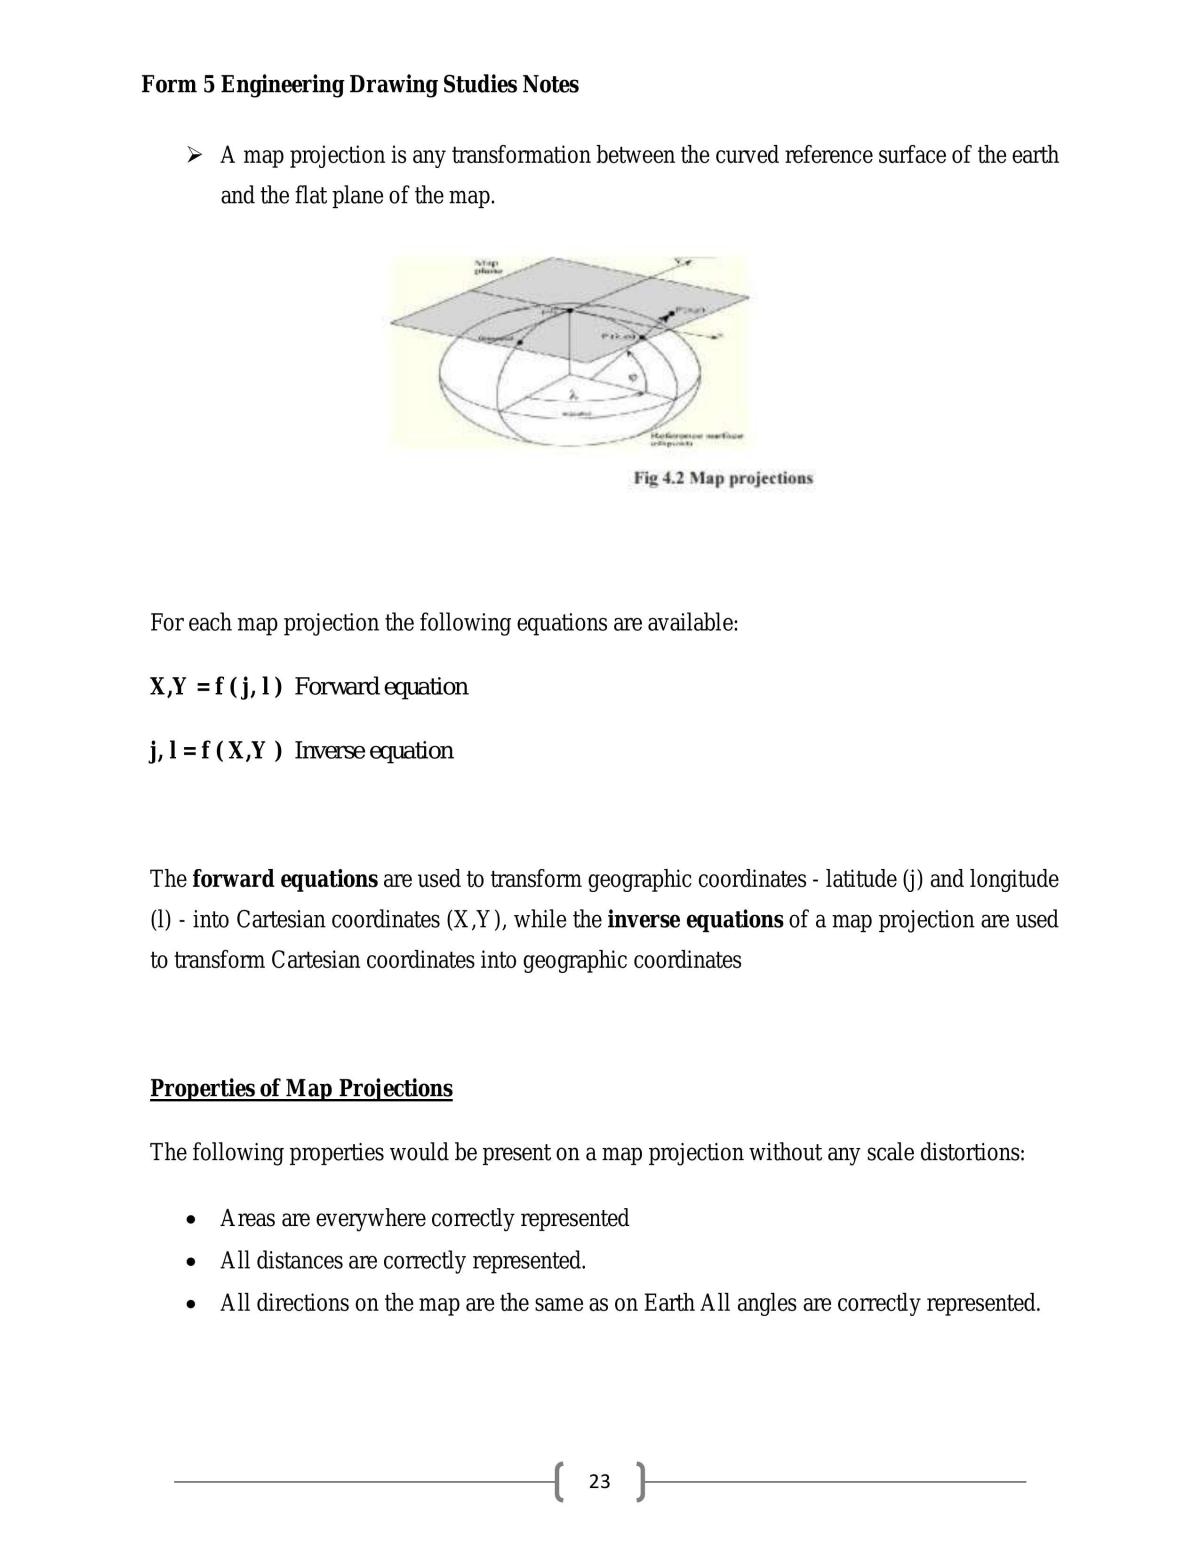 Form 5 Engineering Drawing Studies Notes - Page 23